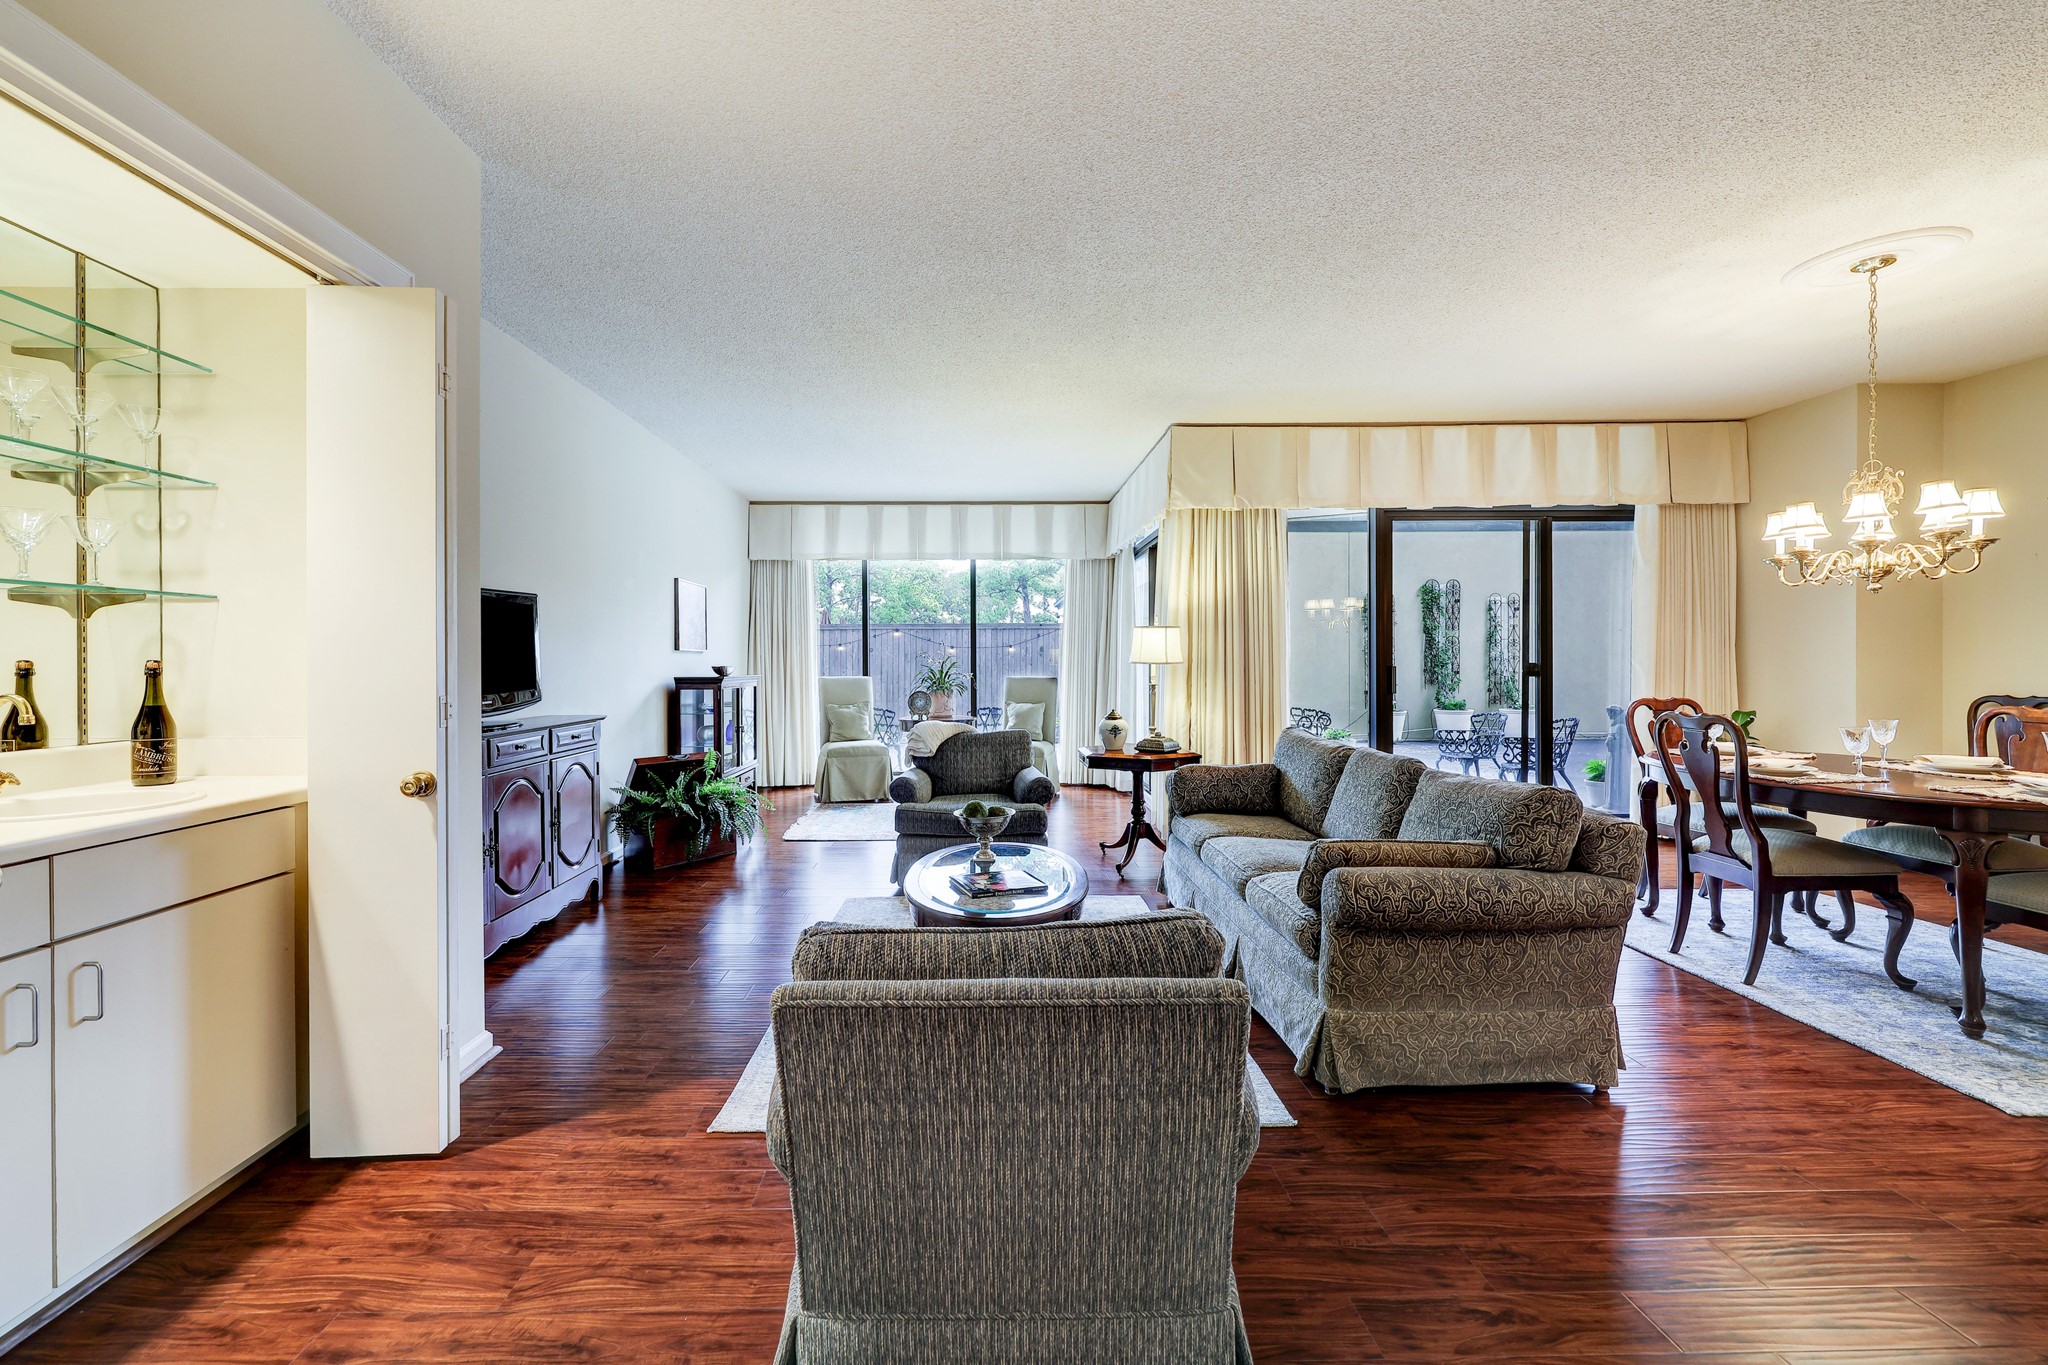 Living area has additional seating area near the full-length windows and sliding glass doors.